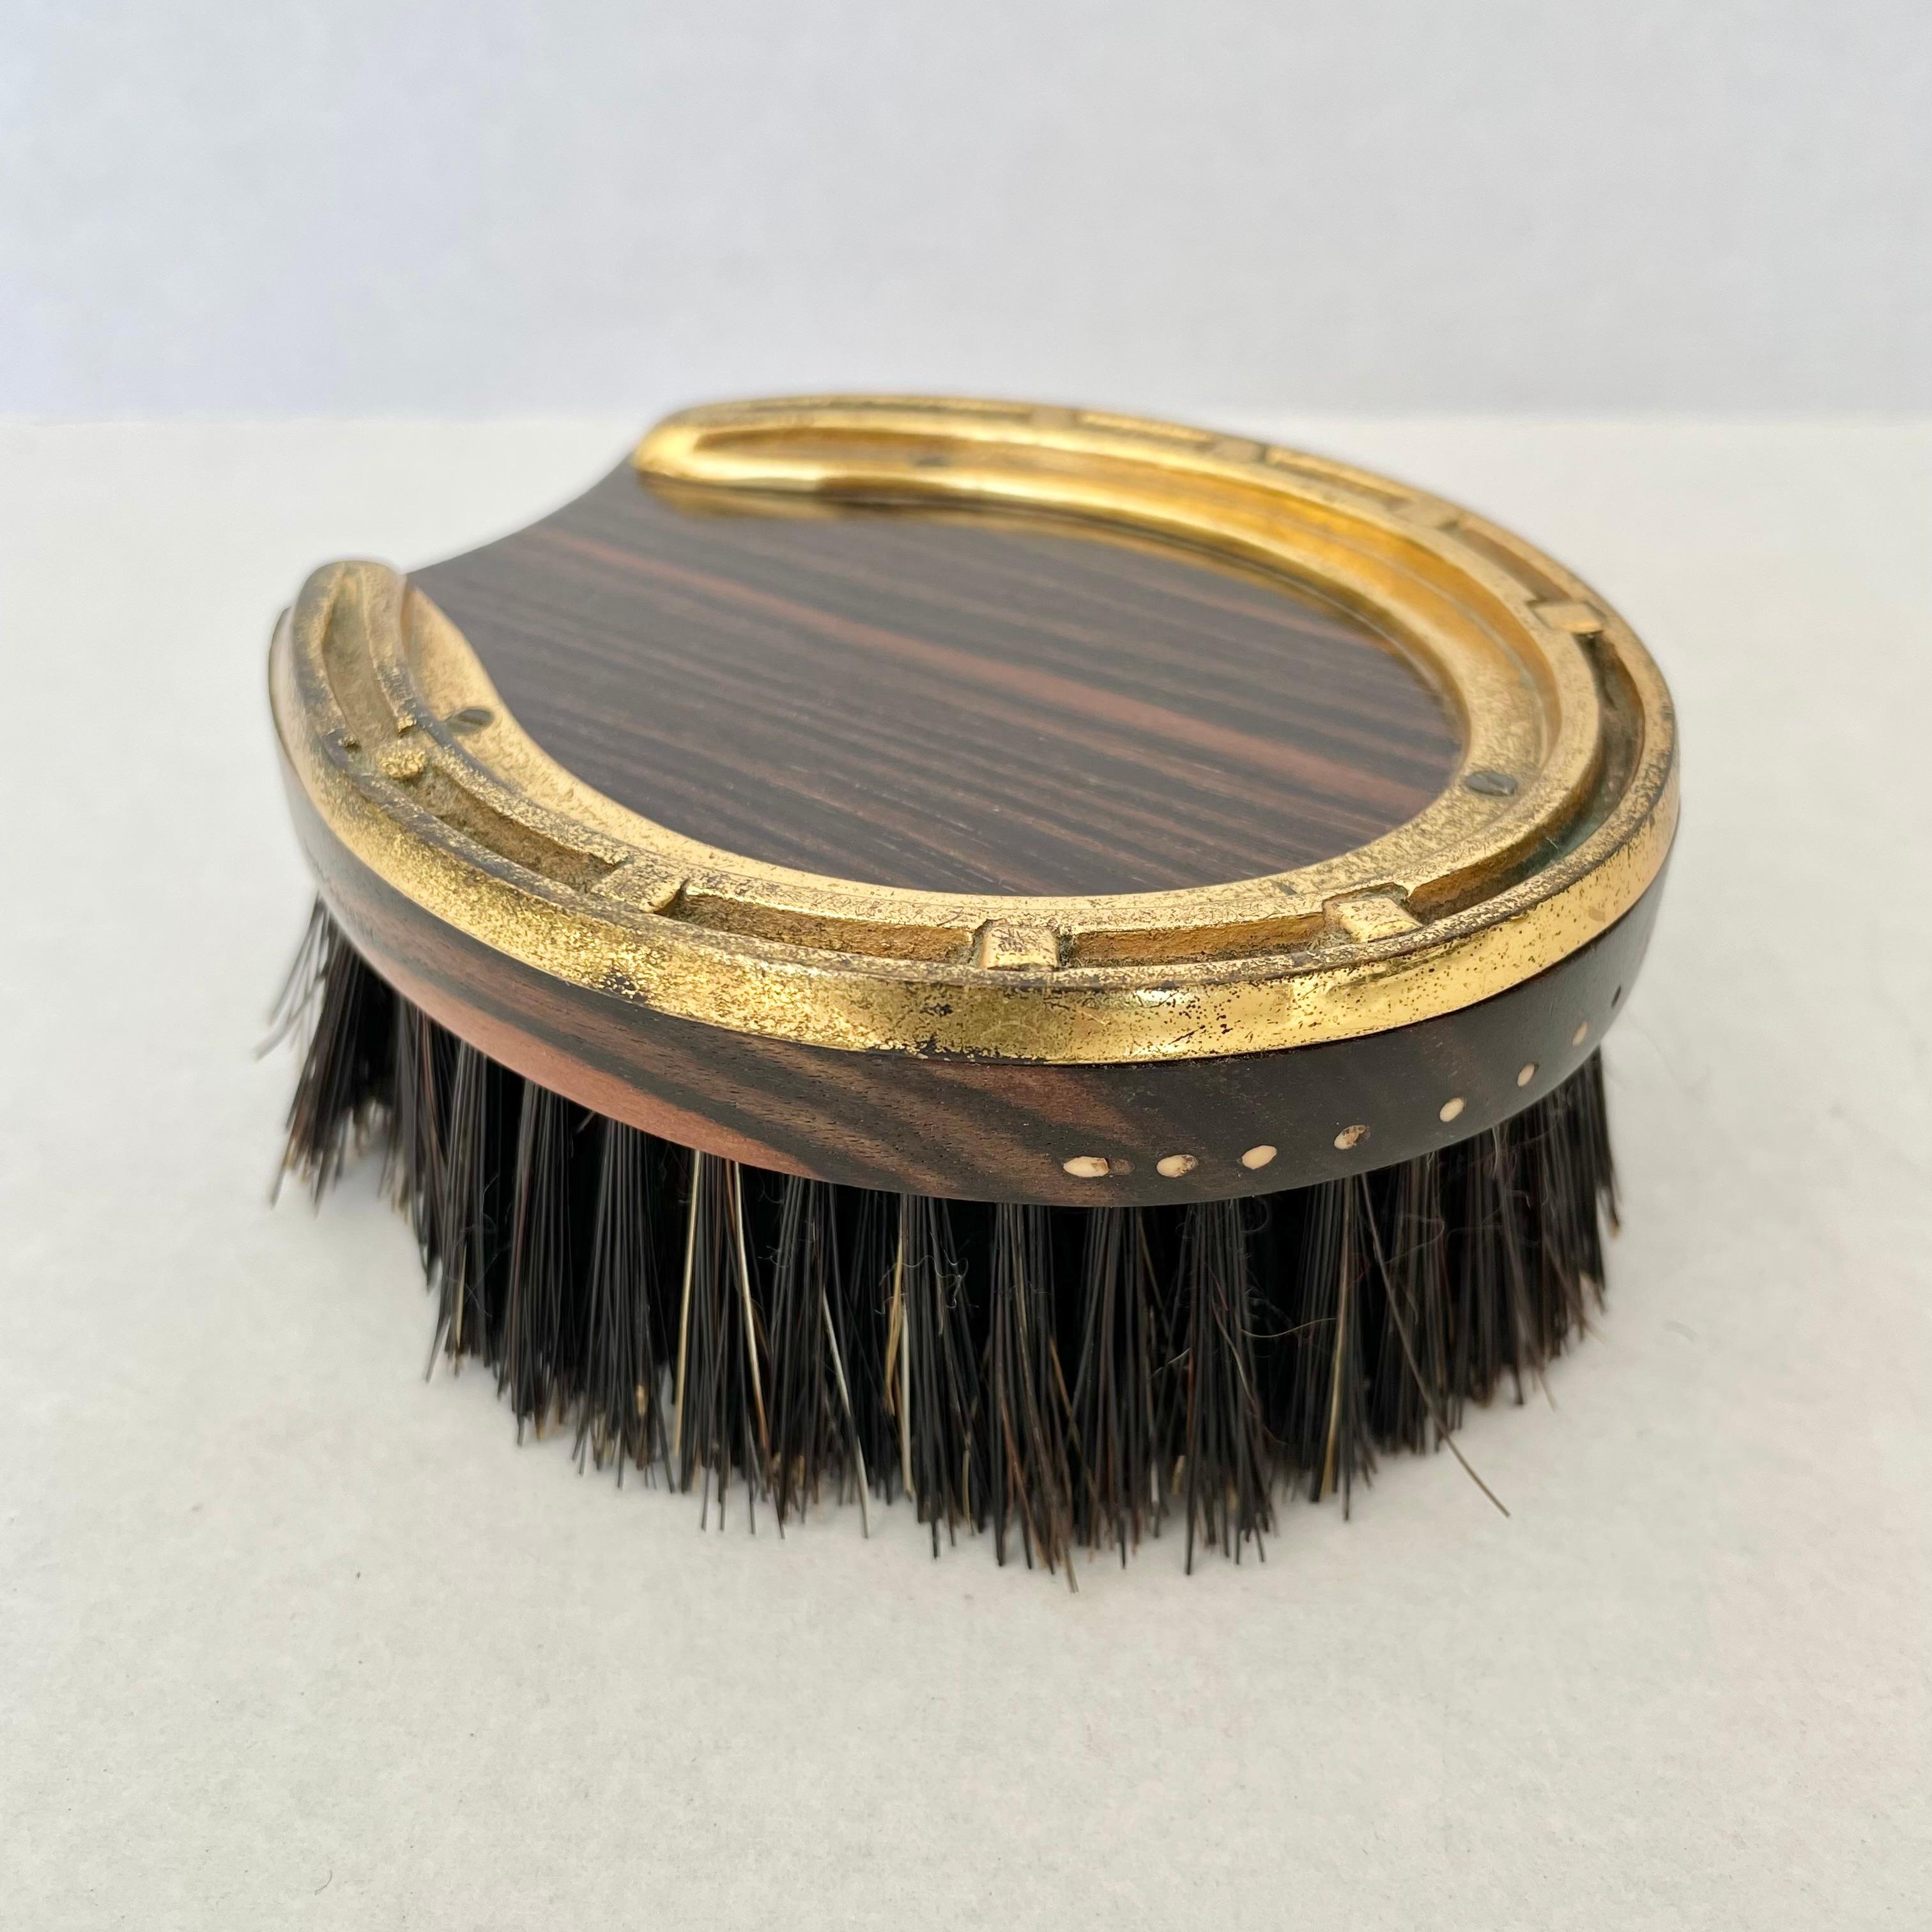 Beautiful Hermès clothing brush. Made from rare Ebony Macassar wood, boar bristles and brass. This brush is meant to preserve the life and appearance of clothing and fabrics by keeping the garment threads from getting matted down or looking worn or